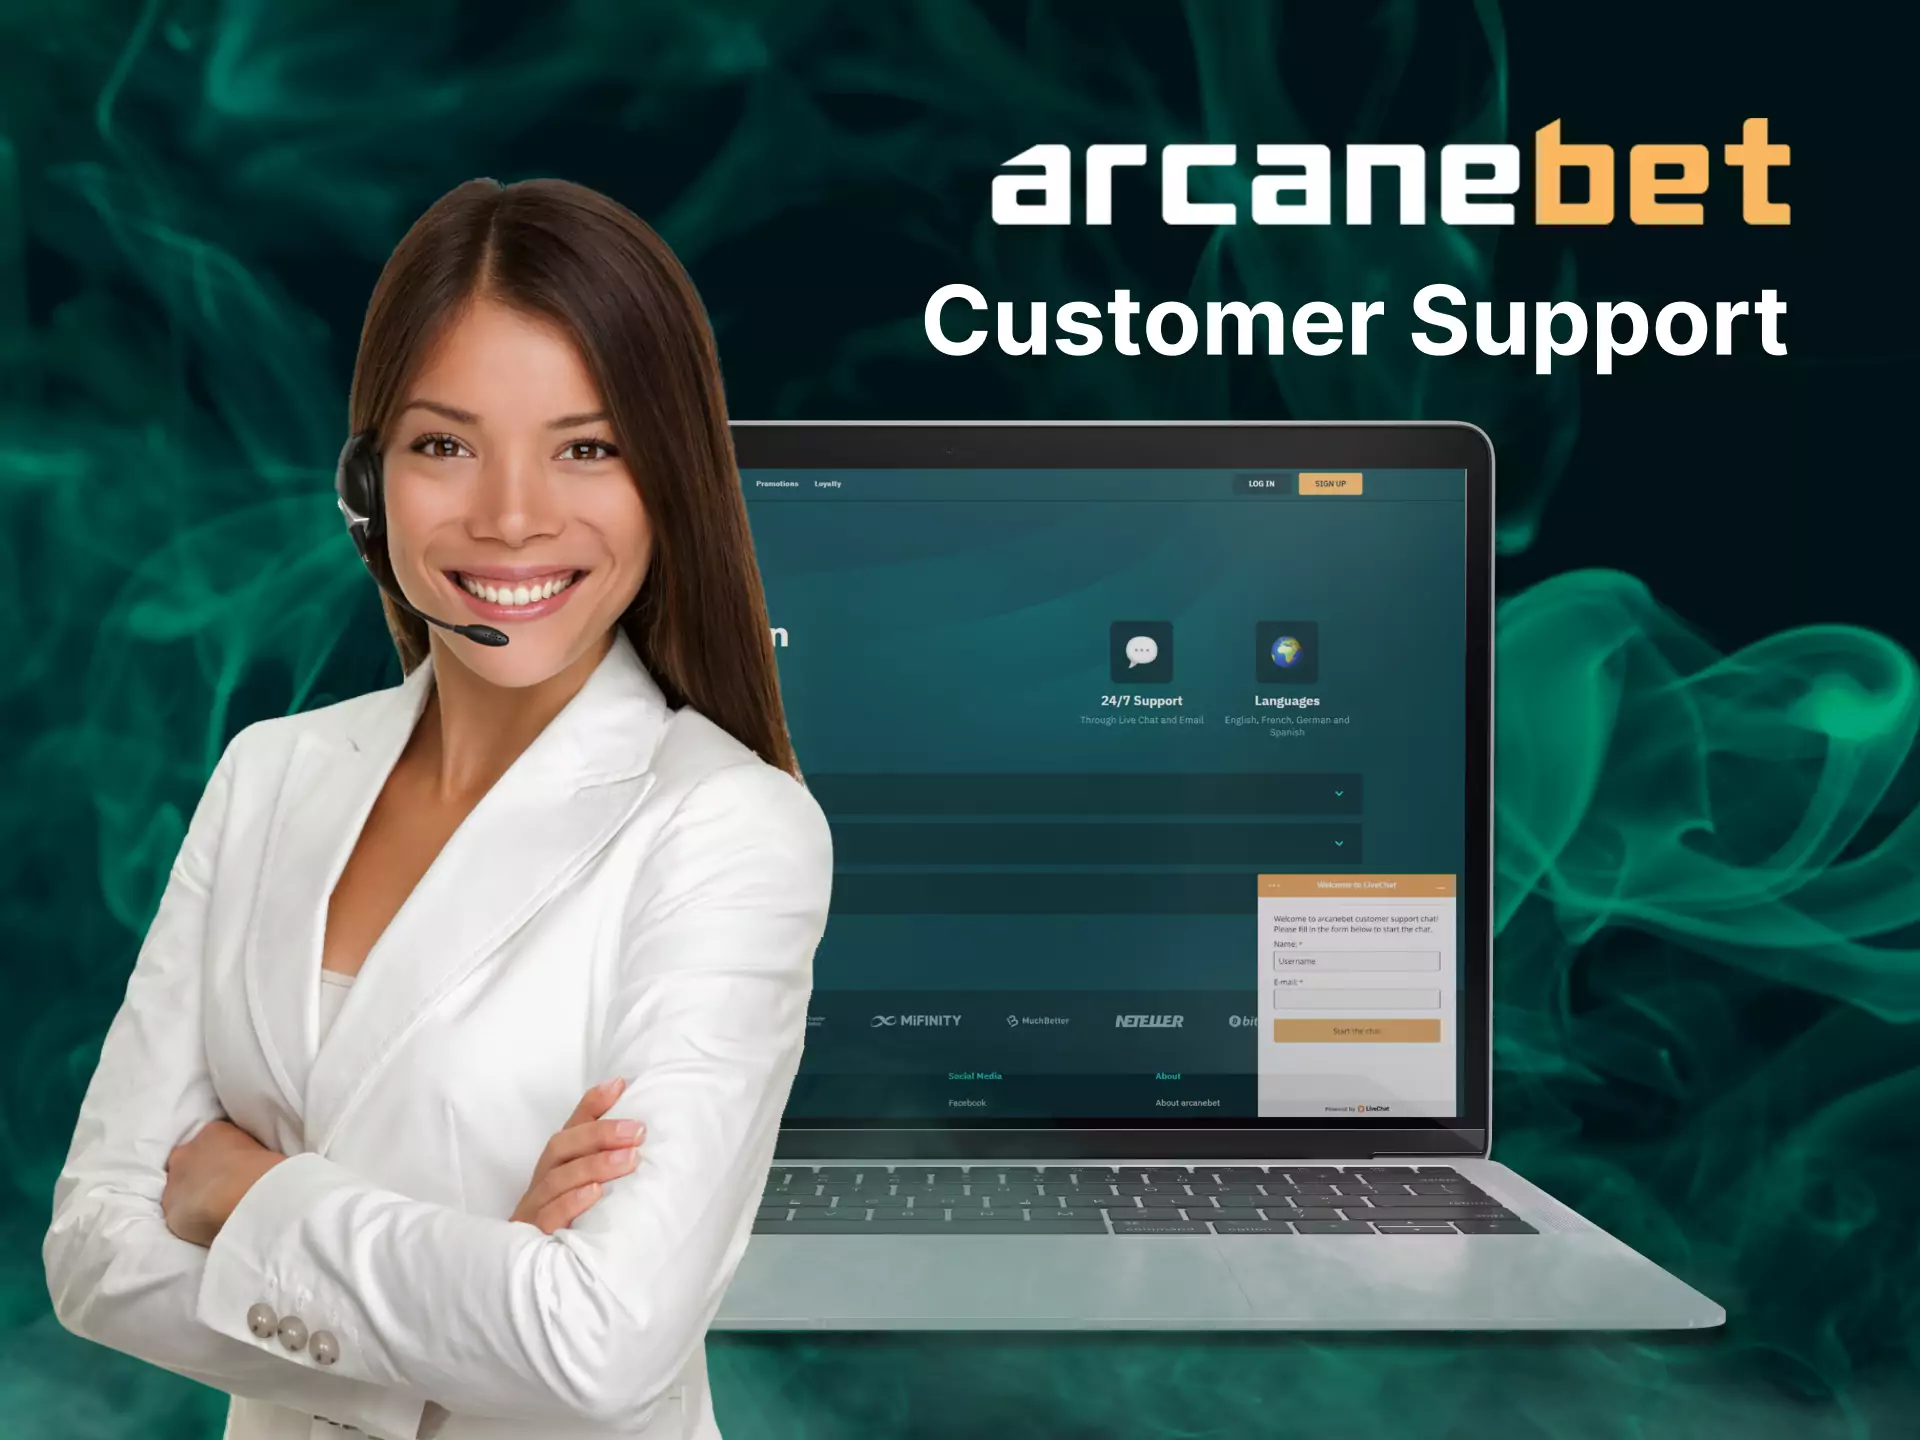 Arcanebet support will provide you with any help at any time.